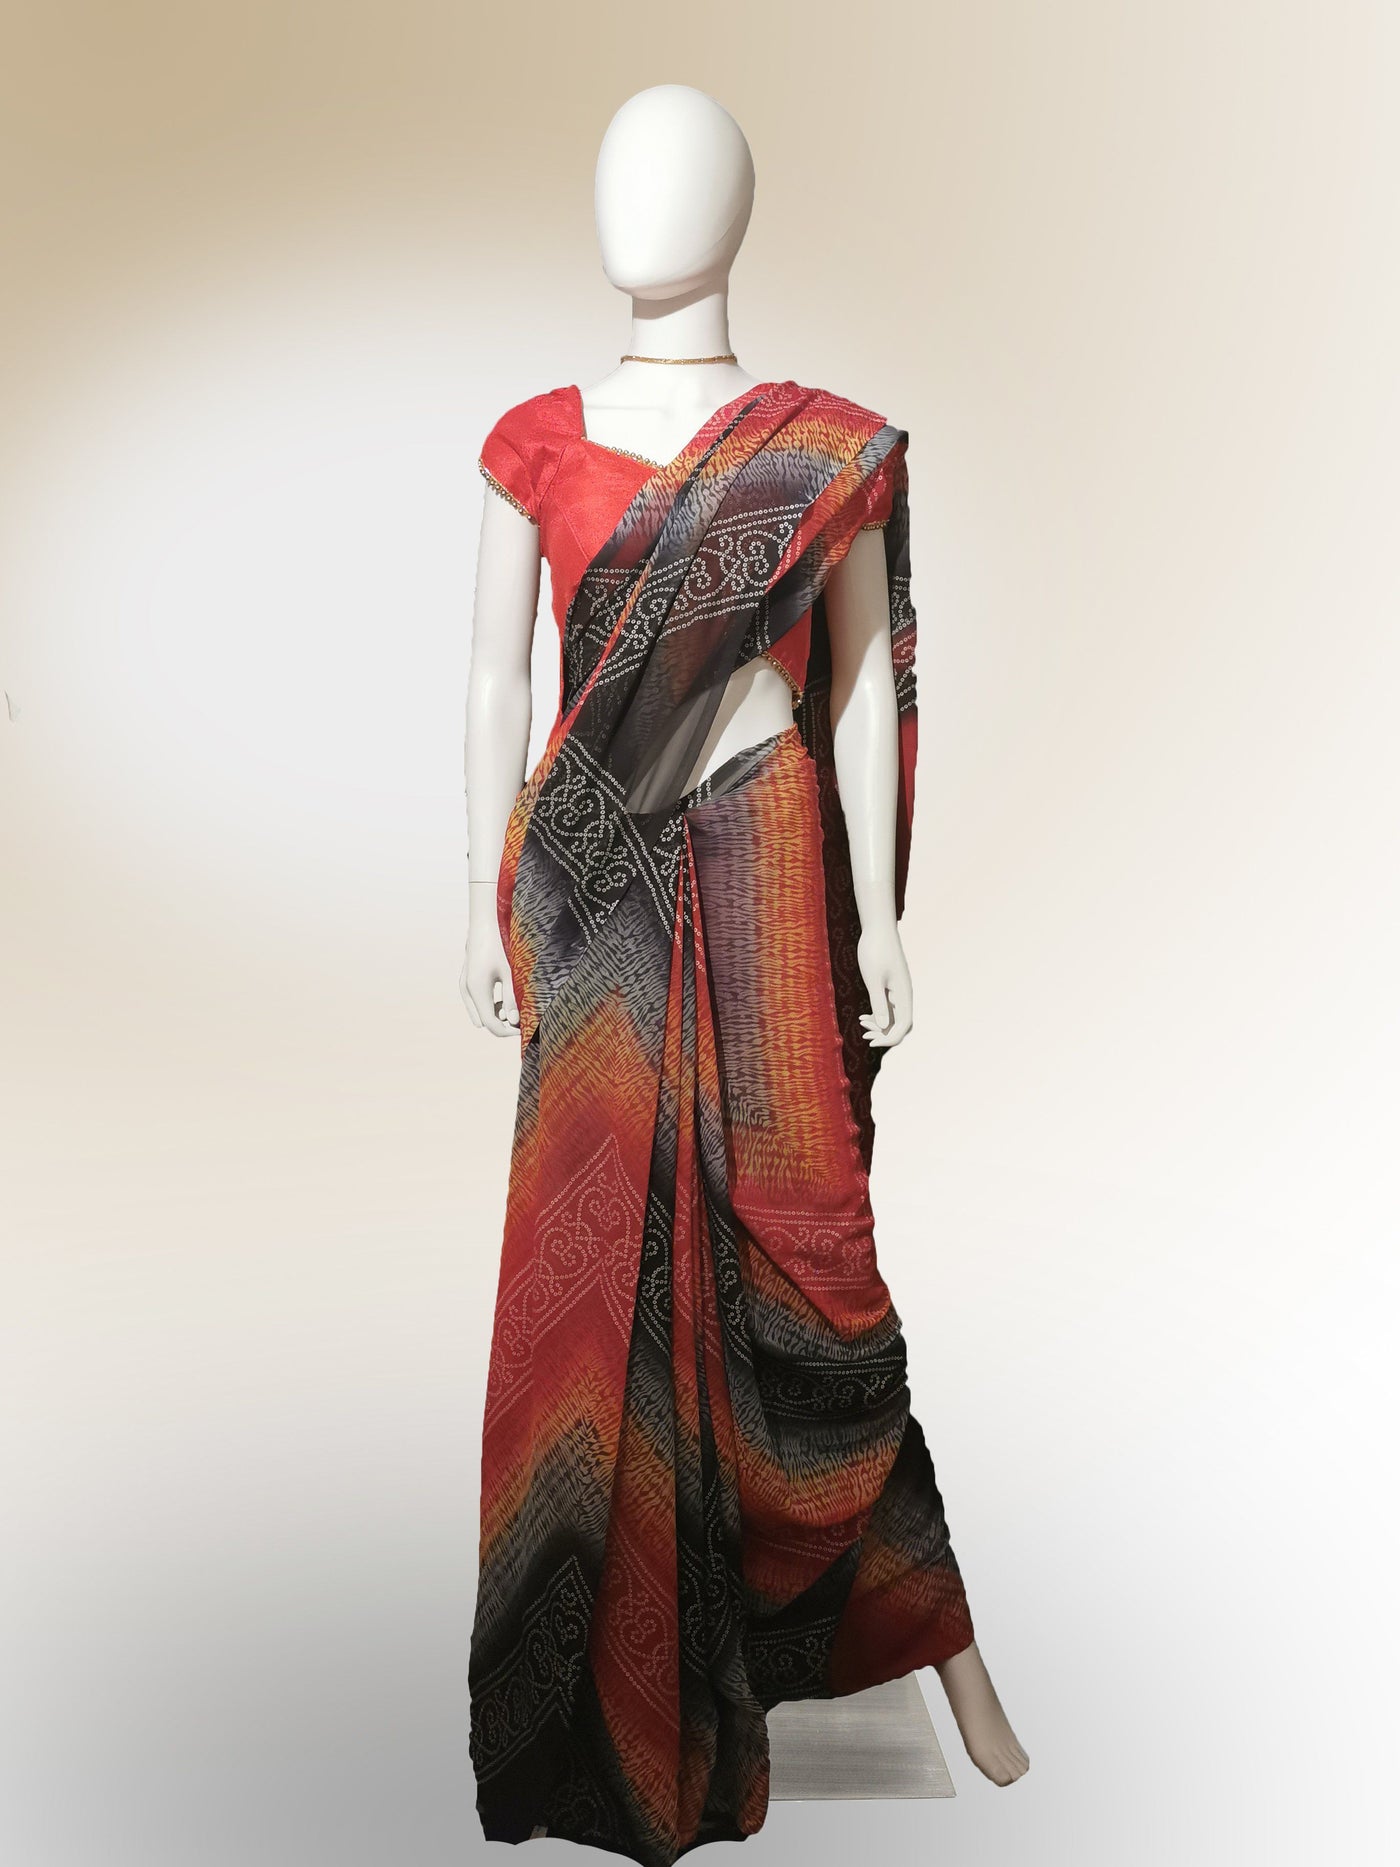 Saree in Fiery Red blend and Black with Henna Print Indian Clothing in Denver, CO, Aurora, CO, Boulder, CO, Fort Collins, CO, Colorado Springs, CO, Parker, CO, Highlands Ranch, CO, Cherry Creek, CO, Centennial, CO, and Longmont, CO. NATIONWIDE SHIPPING USA- India Fashion X